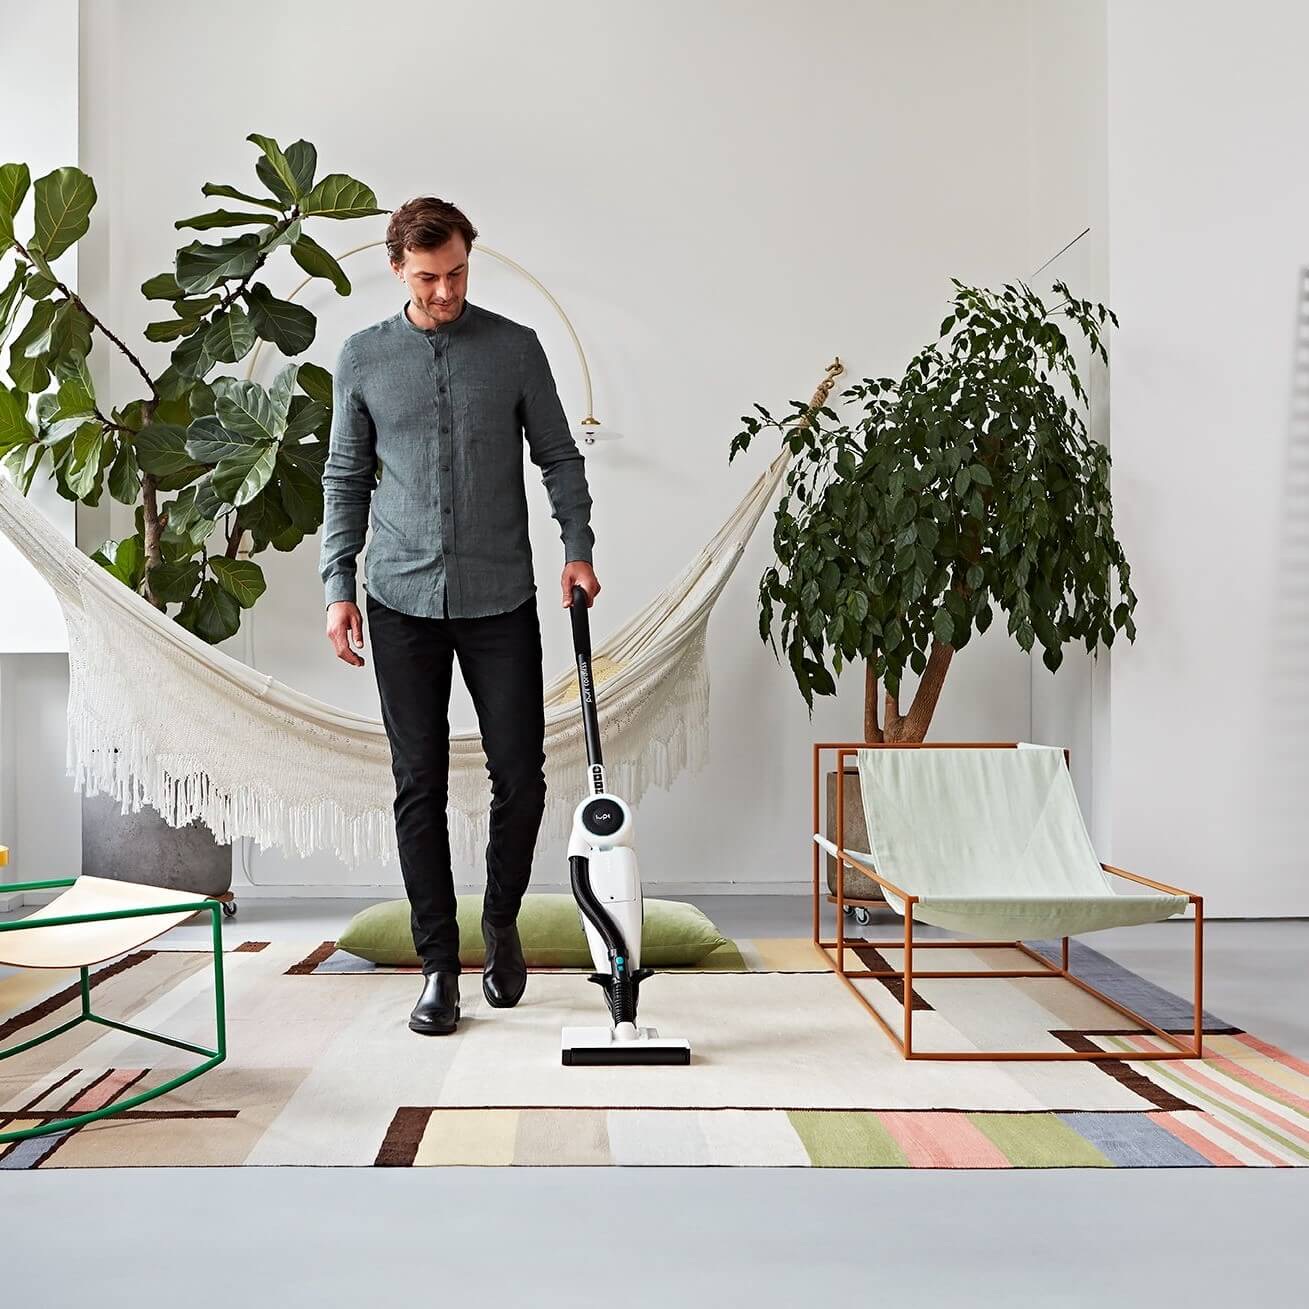 A man vacuuming a room with modern decor and a hammock.